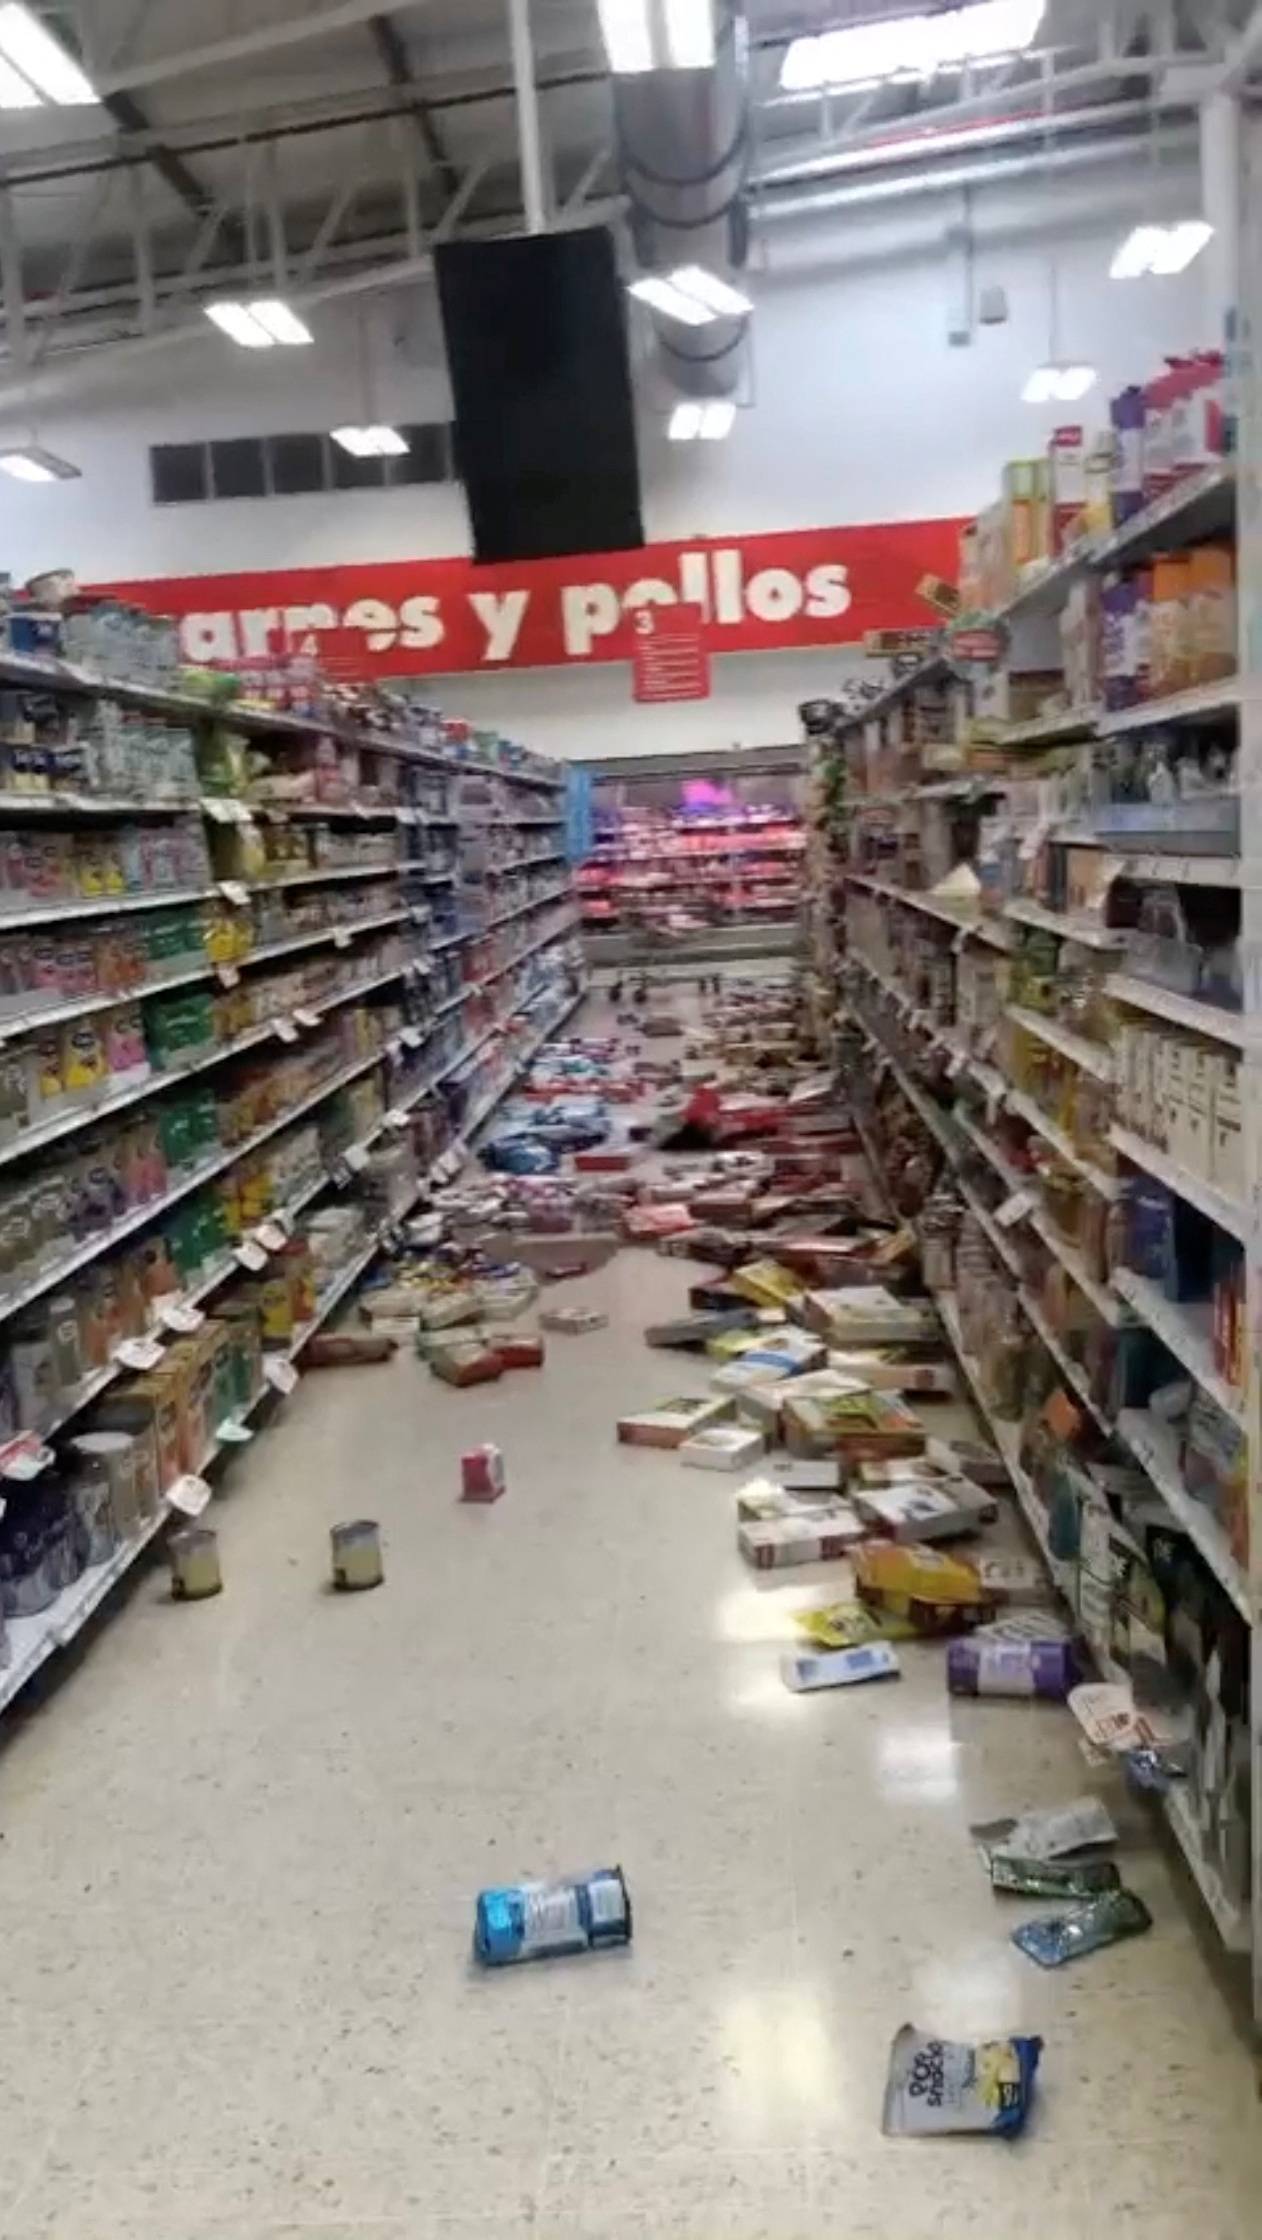 Aftermath of an earthquake in Guayaquil